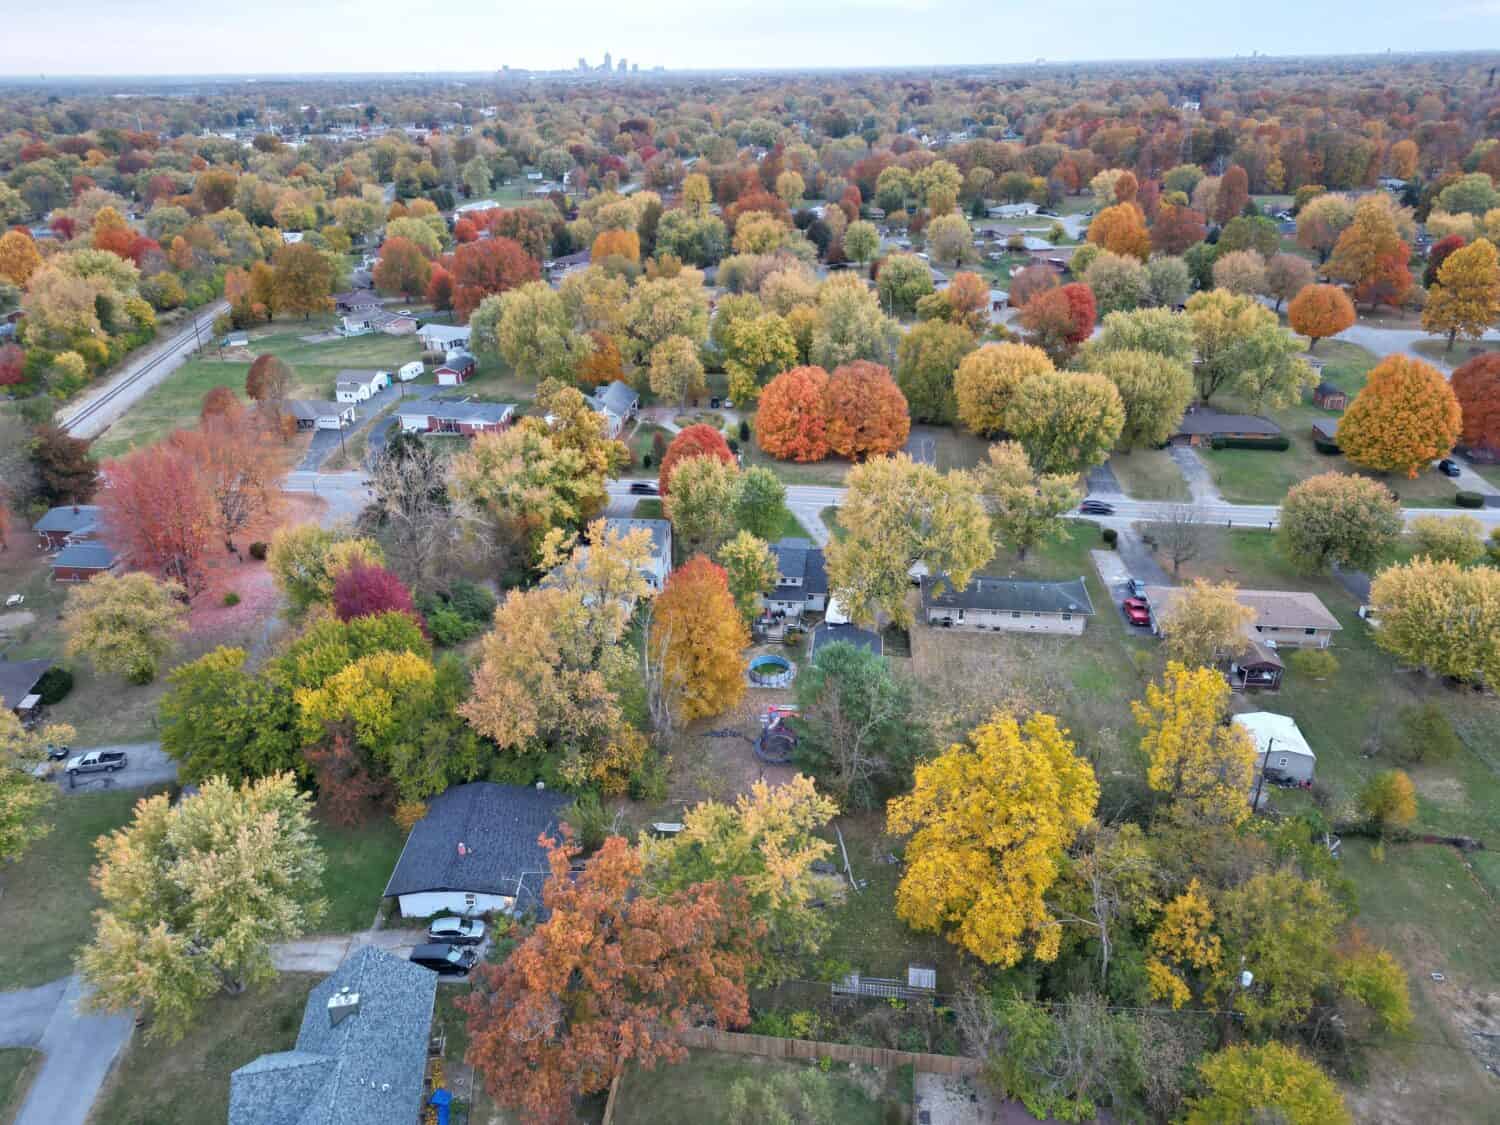 An aerial view of a calm neighborhood in Indianapolis surrounded by colorful autumn trees. The USA.